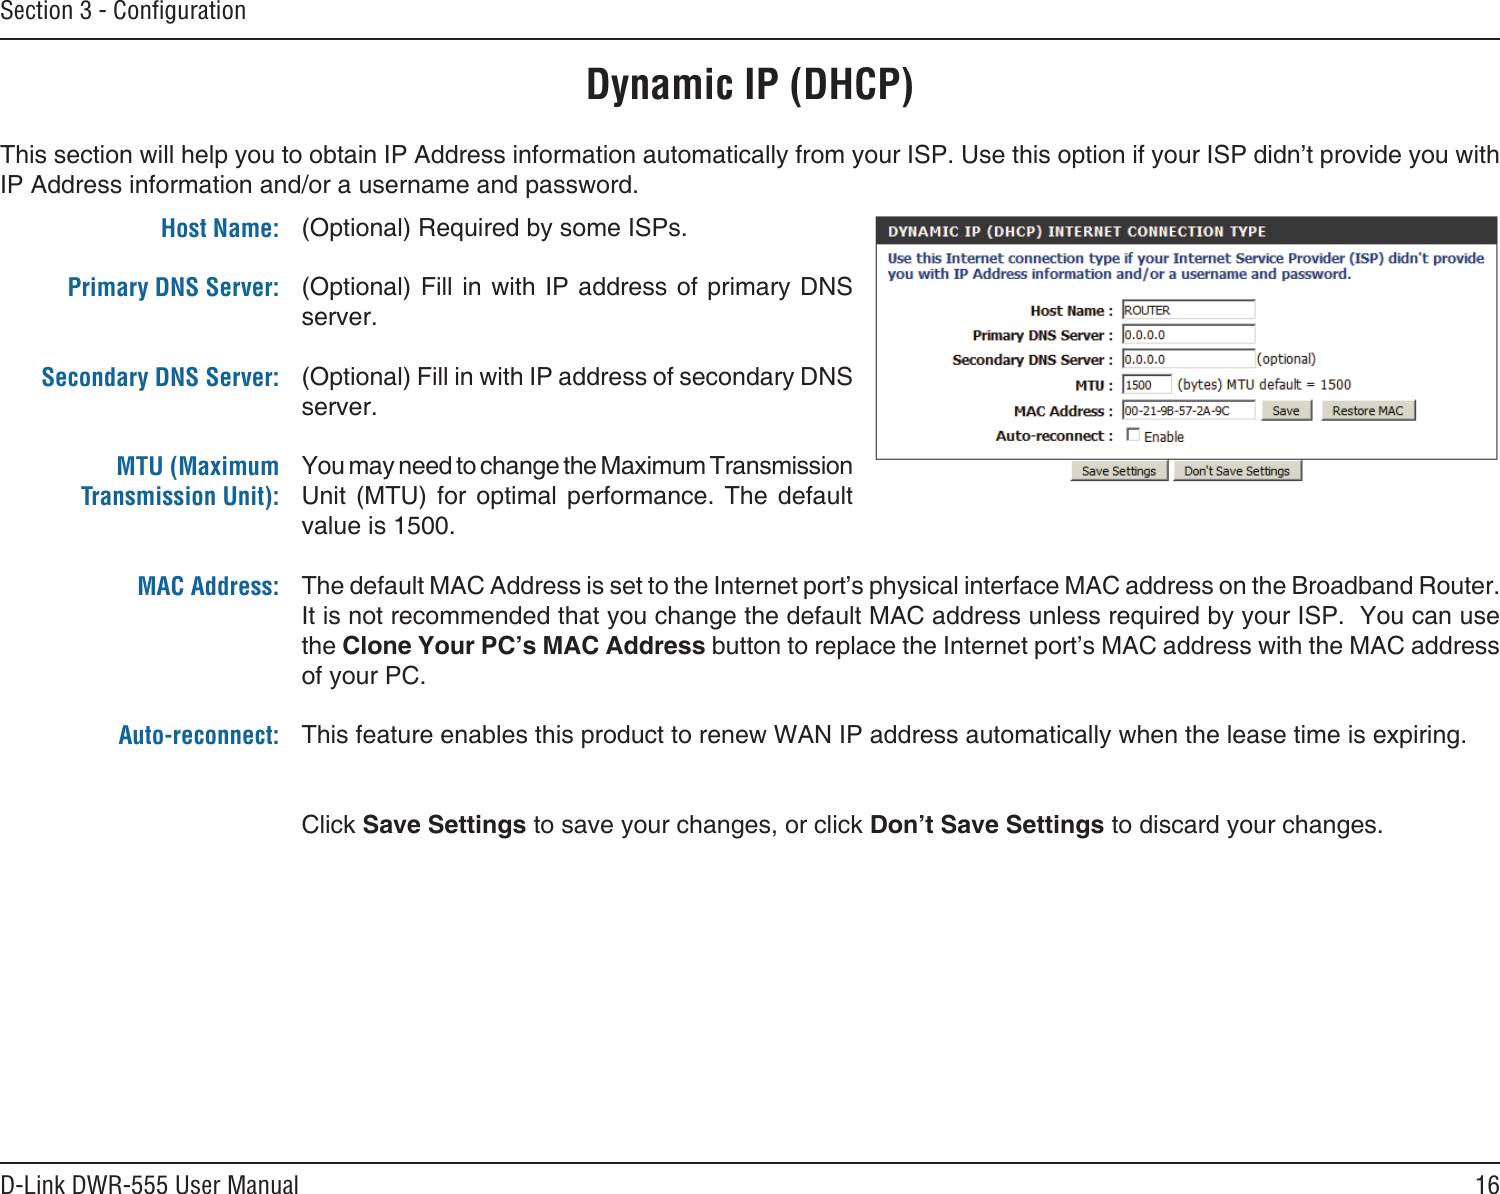 16D-Link DWR-555 User ManualSection 3 - ConﬁgurationDynamic IP (DHCP)(Optional) Required by some ISPs.(Optional) Fill in with IP address of primary DNS server.(Optional) Fill in with IP address of secondary DNS server.You may need to change the Maximum Transmission Unit  (MTU)  for  optimal  performance.  The  default value is 1500.The default MAC Address is set to the Internet port’s physical interface MAC address on the Broadband Router. It is not recommended that you change the default MAC address unless required by your ISP.  You can use the Clone Your PC’s MAC Address button to replace the Internet port’s MAC address with the MAC address of your PC.This feature enables this product to renew WAN IP address automatically when the lease time is expiring. Click Save Settings to save your changes, or click Don’t Save Settings to discard your changes.This section will help you to obtain IP Address information automatically from your ISP. Use this option if your ISP didn’t provide you with IP Address information and/or a username and password.Host Name:Primary DNS Server: Secondary DNS Server: MTU (Maximum Transmission Unit): MAC Address: Auto-reconnect: